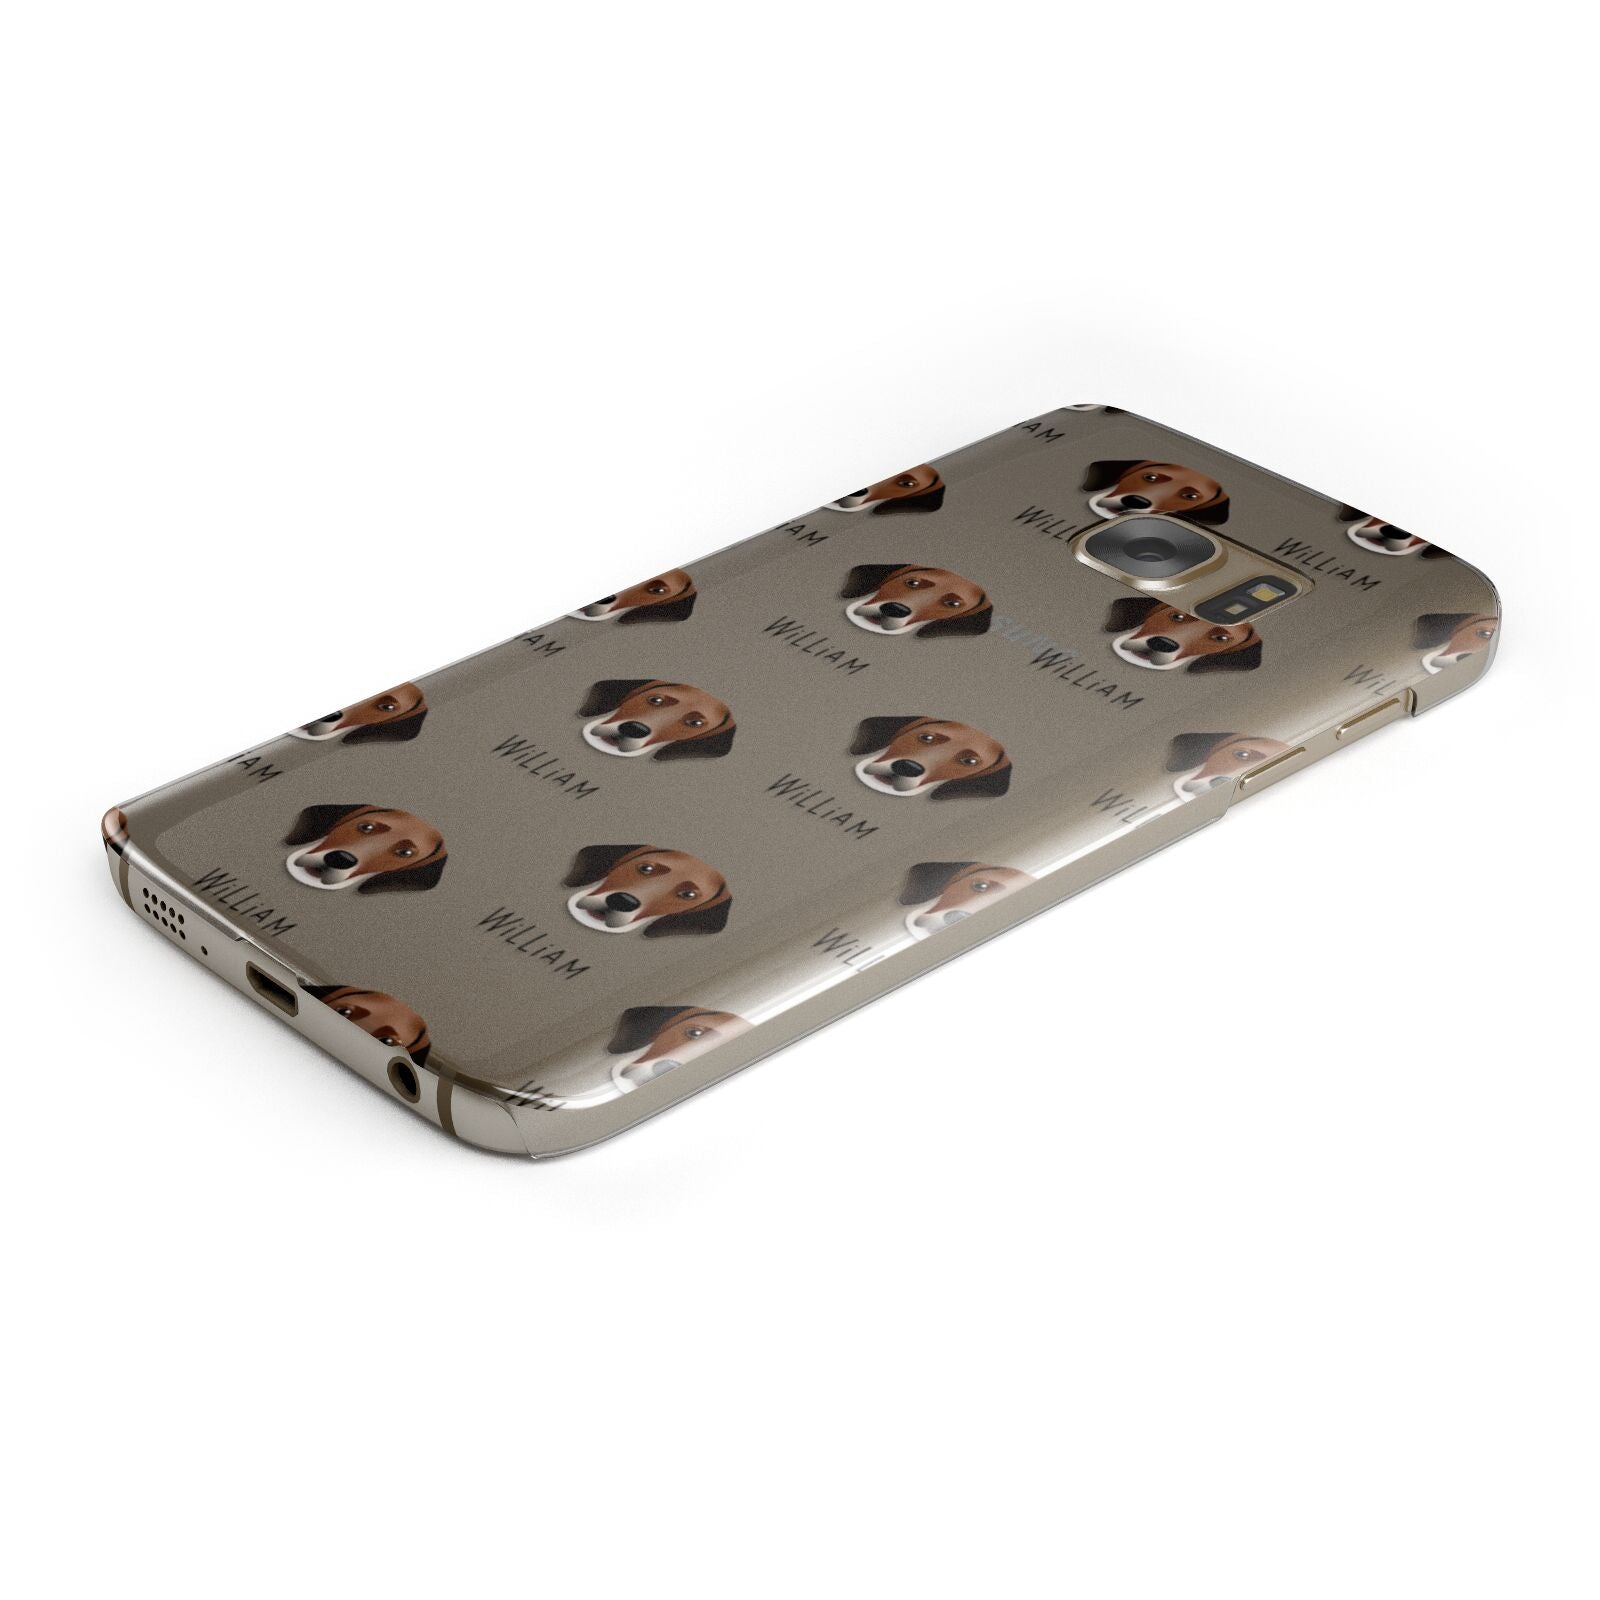 Harrier Icon with Name Samsung Galaxy Case Bottom Cutout